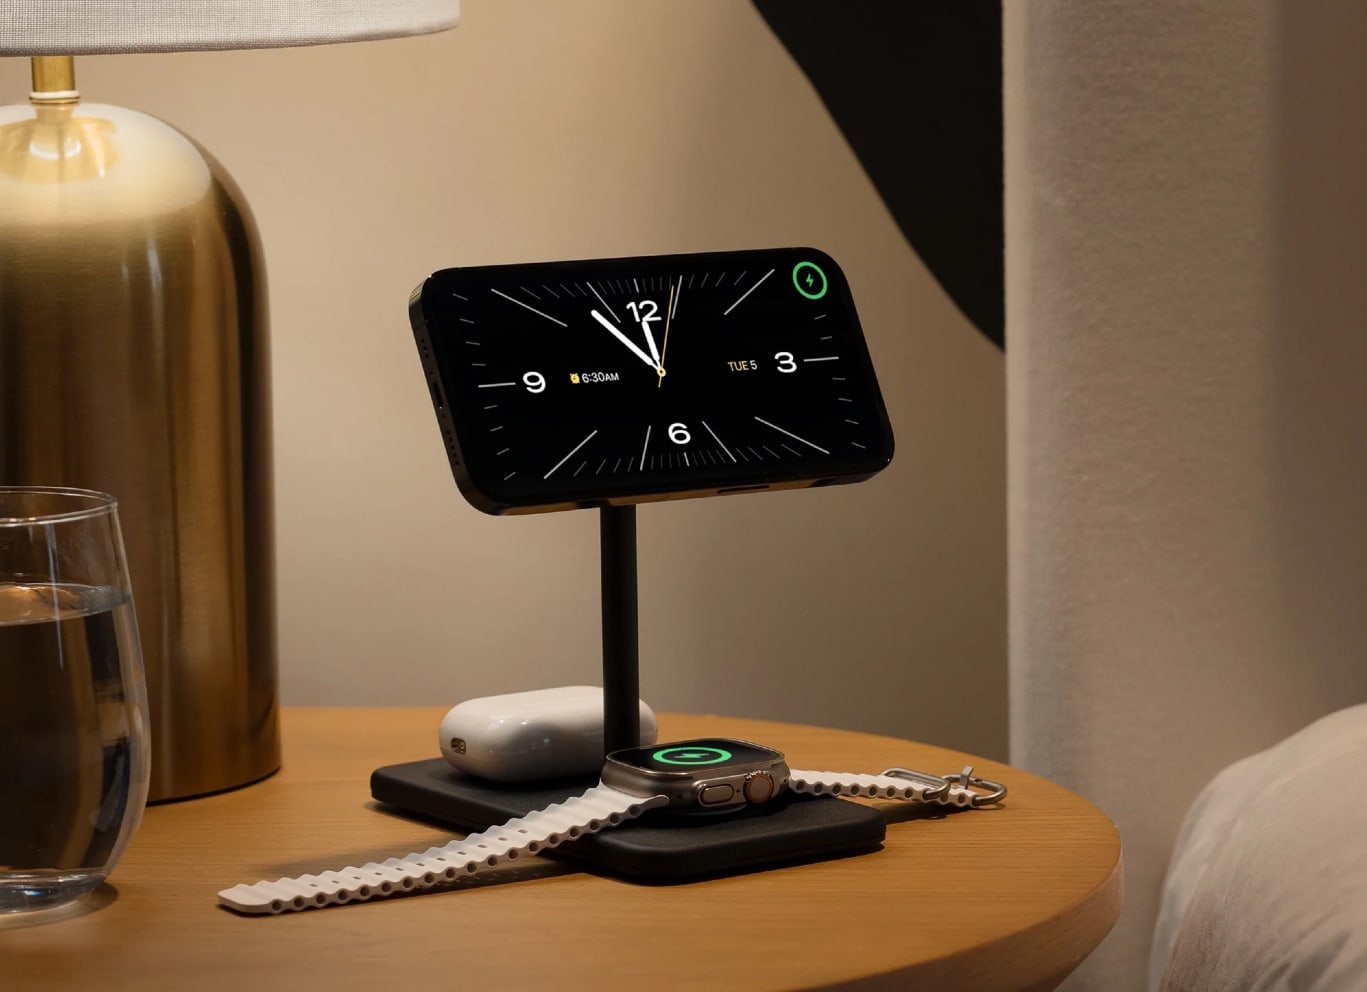 The premium charger is perfect for your nightstand, with an iPhone in Standby Mode like a classic alarm clock.